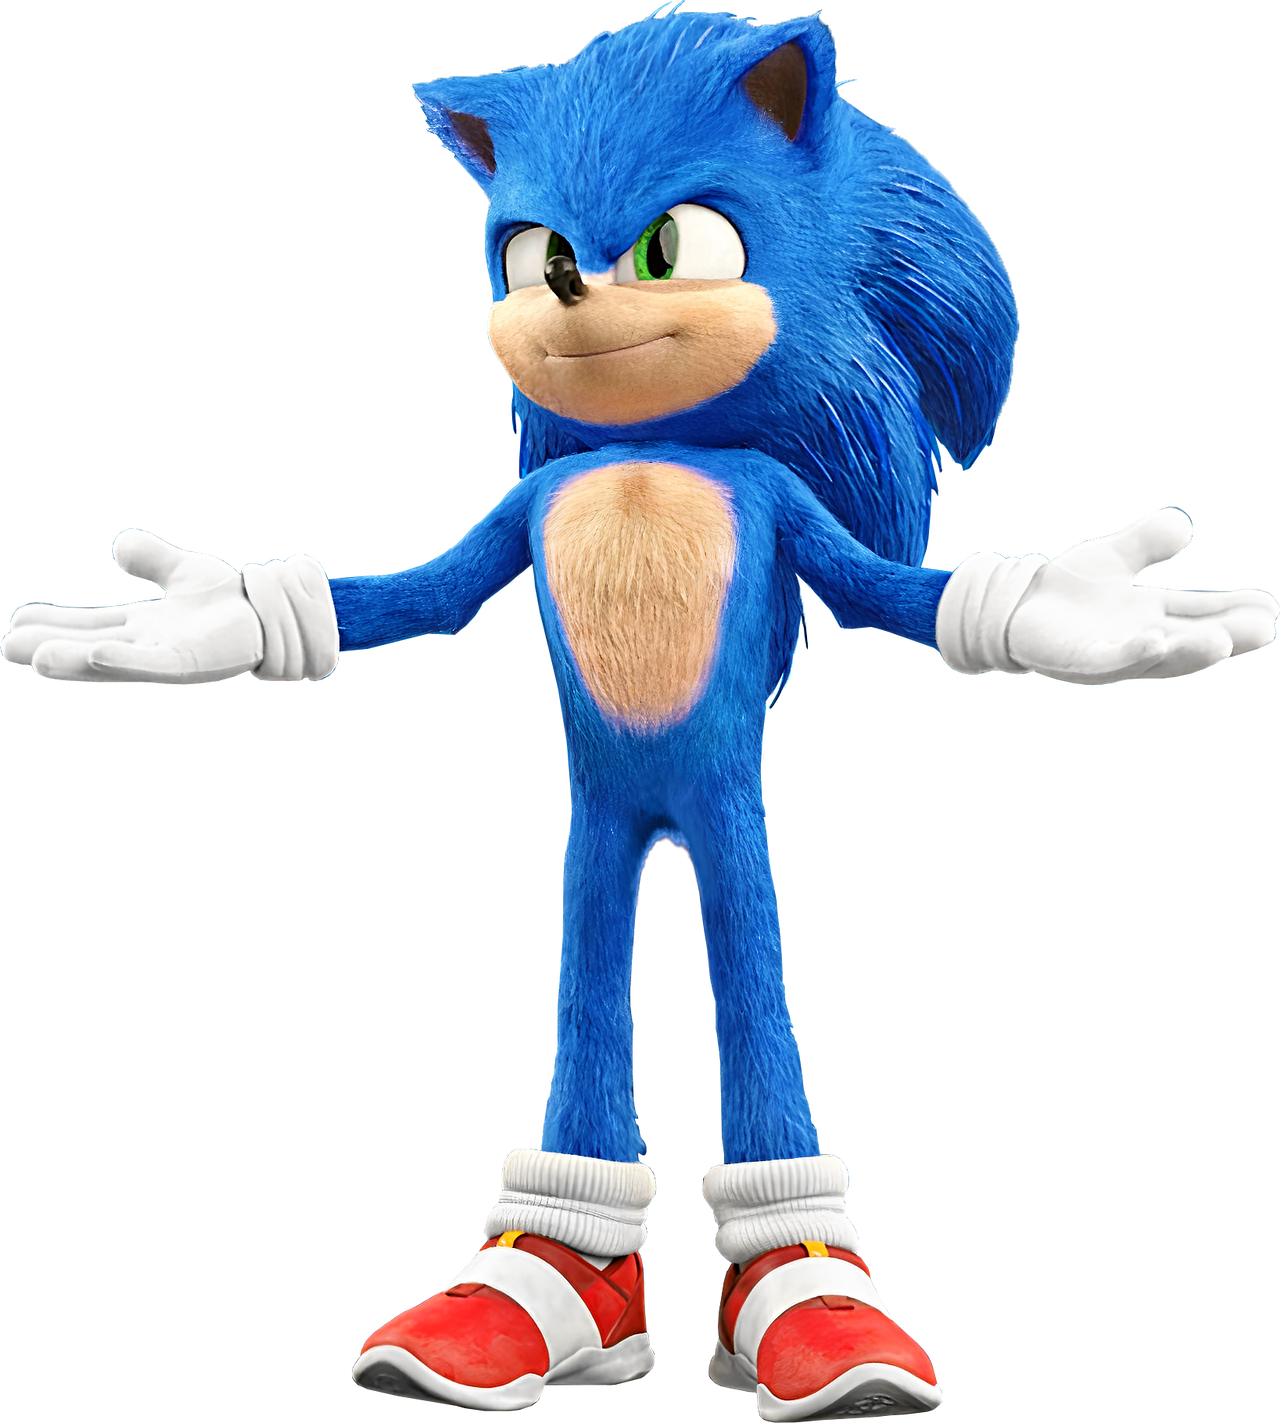 Sonic movie shadow the hedgehog png by sonicfan3500 on DeviantArt